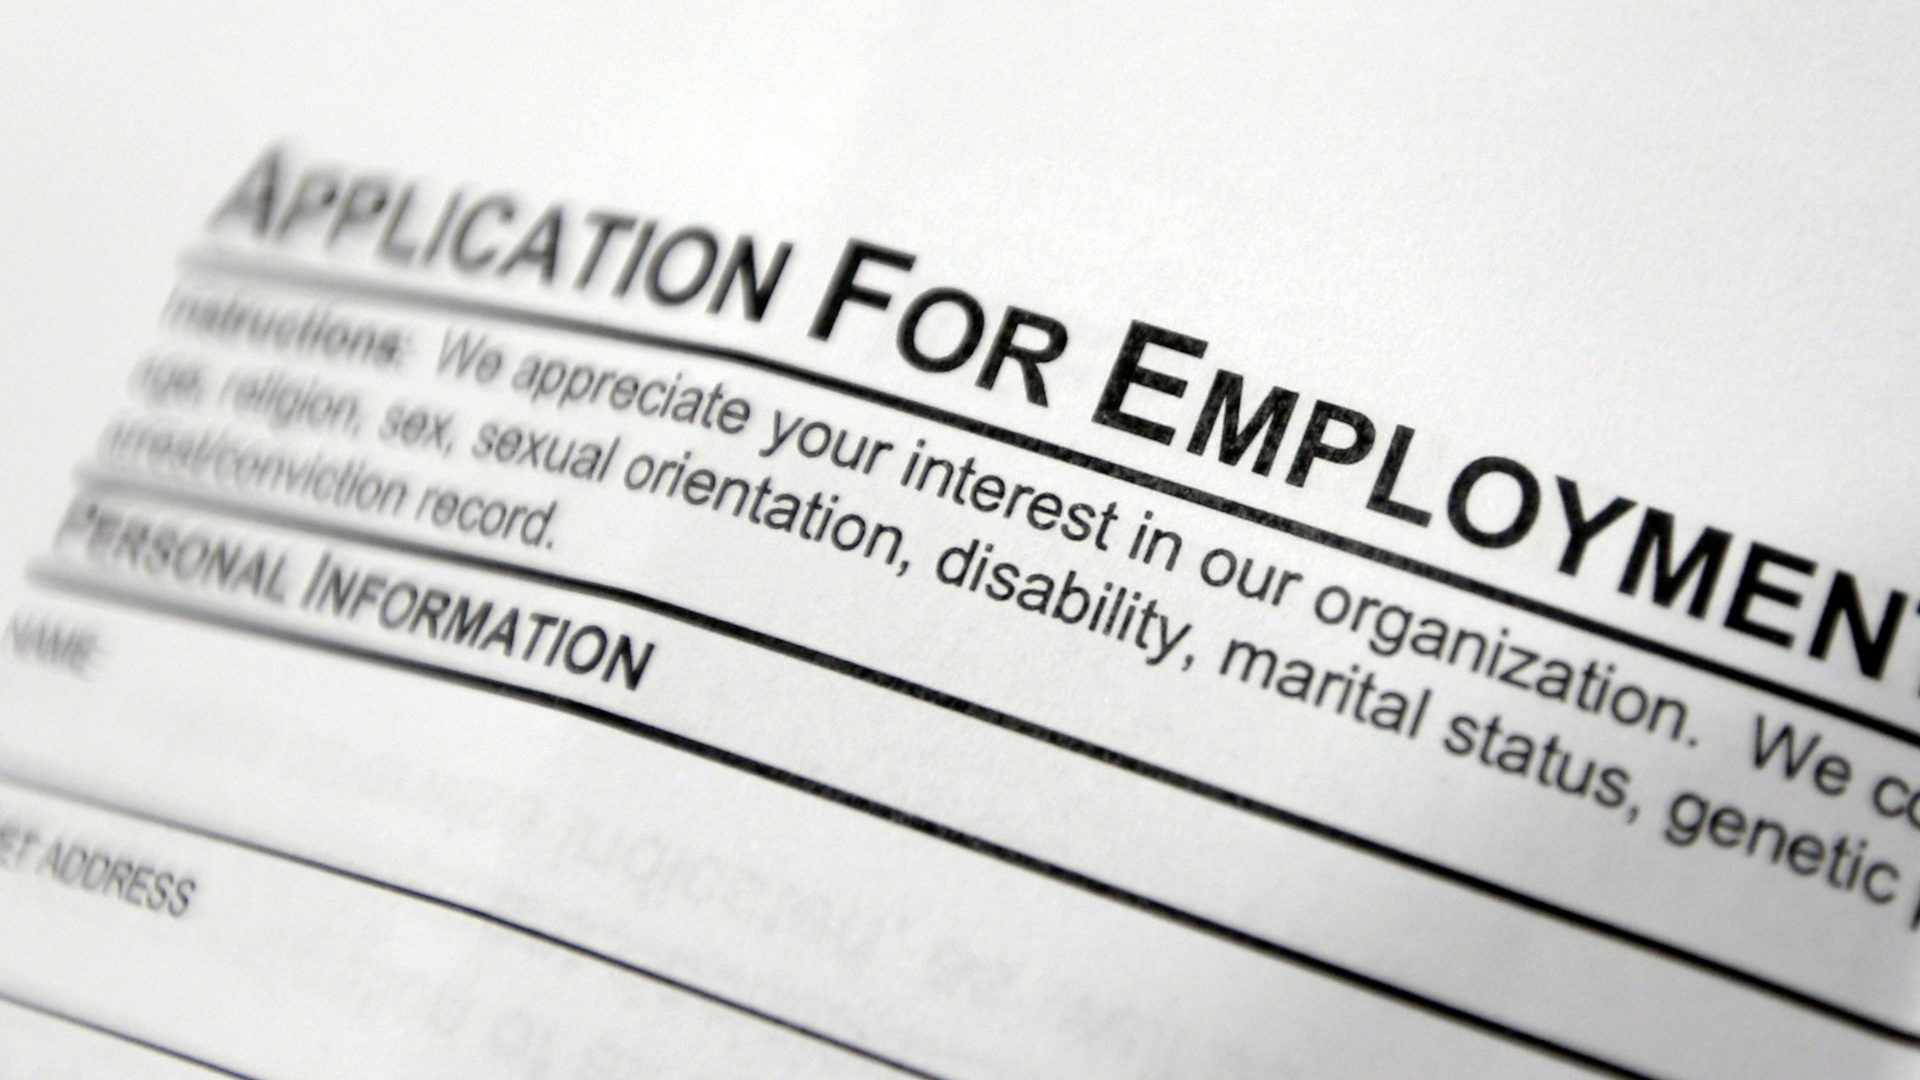 Have you been having trouble reaching the Texas Workforce Commission? Wondering if you qualify for unemployment? We got answers to the questions you've been asking.